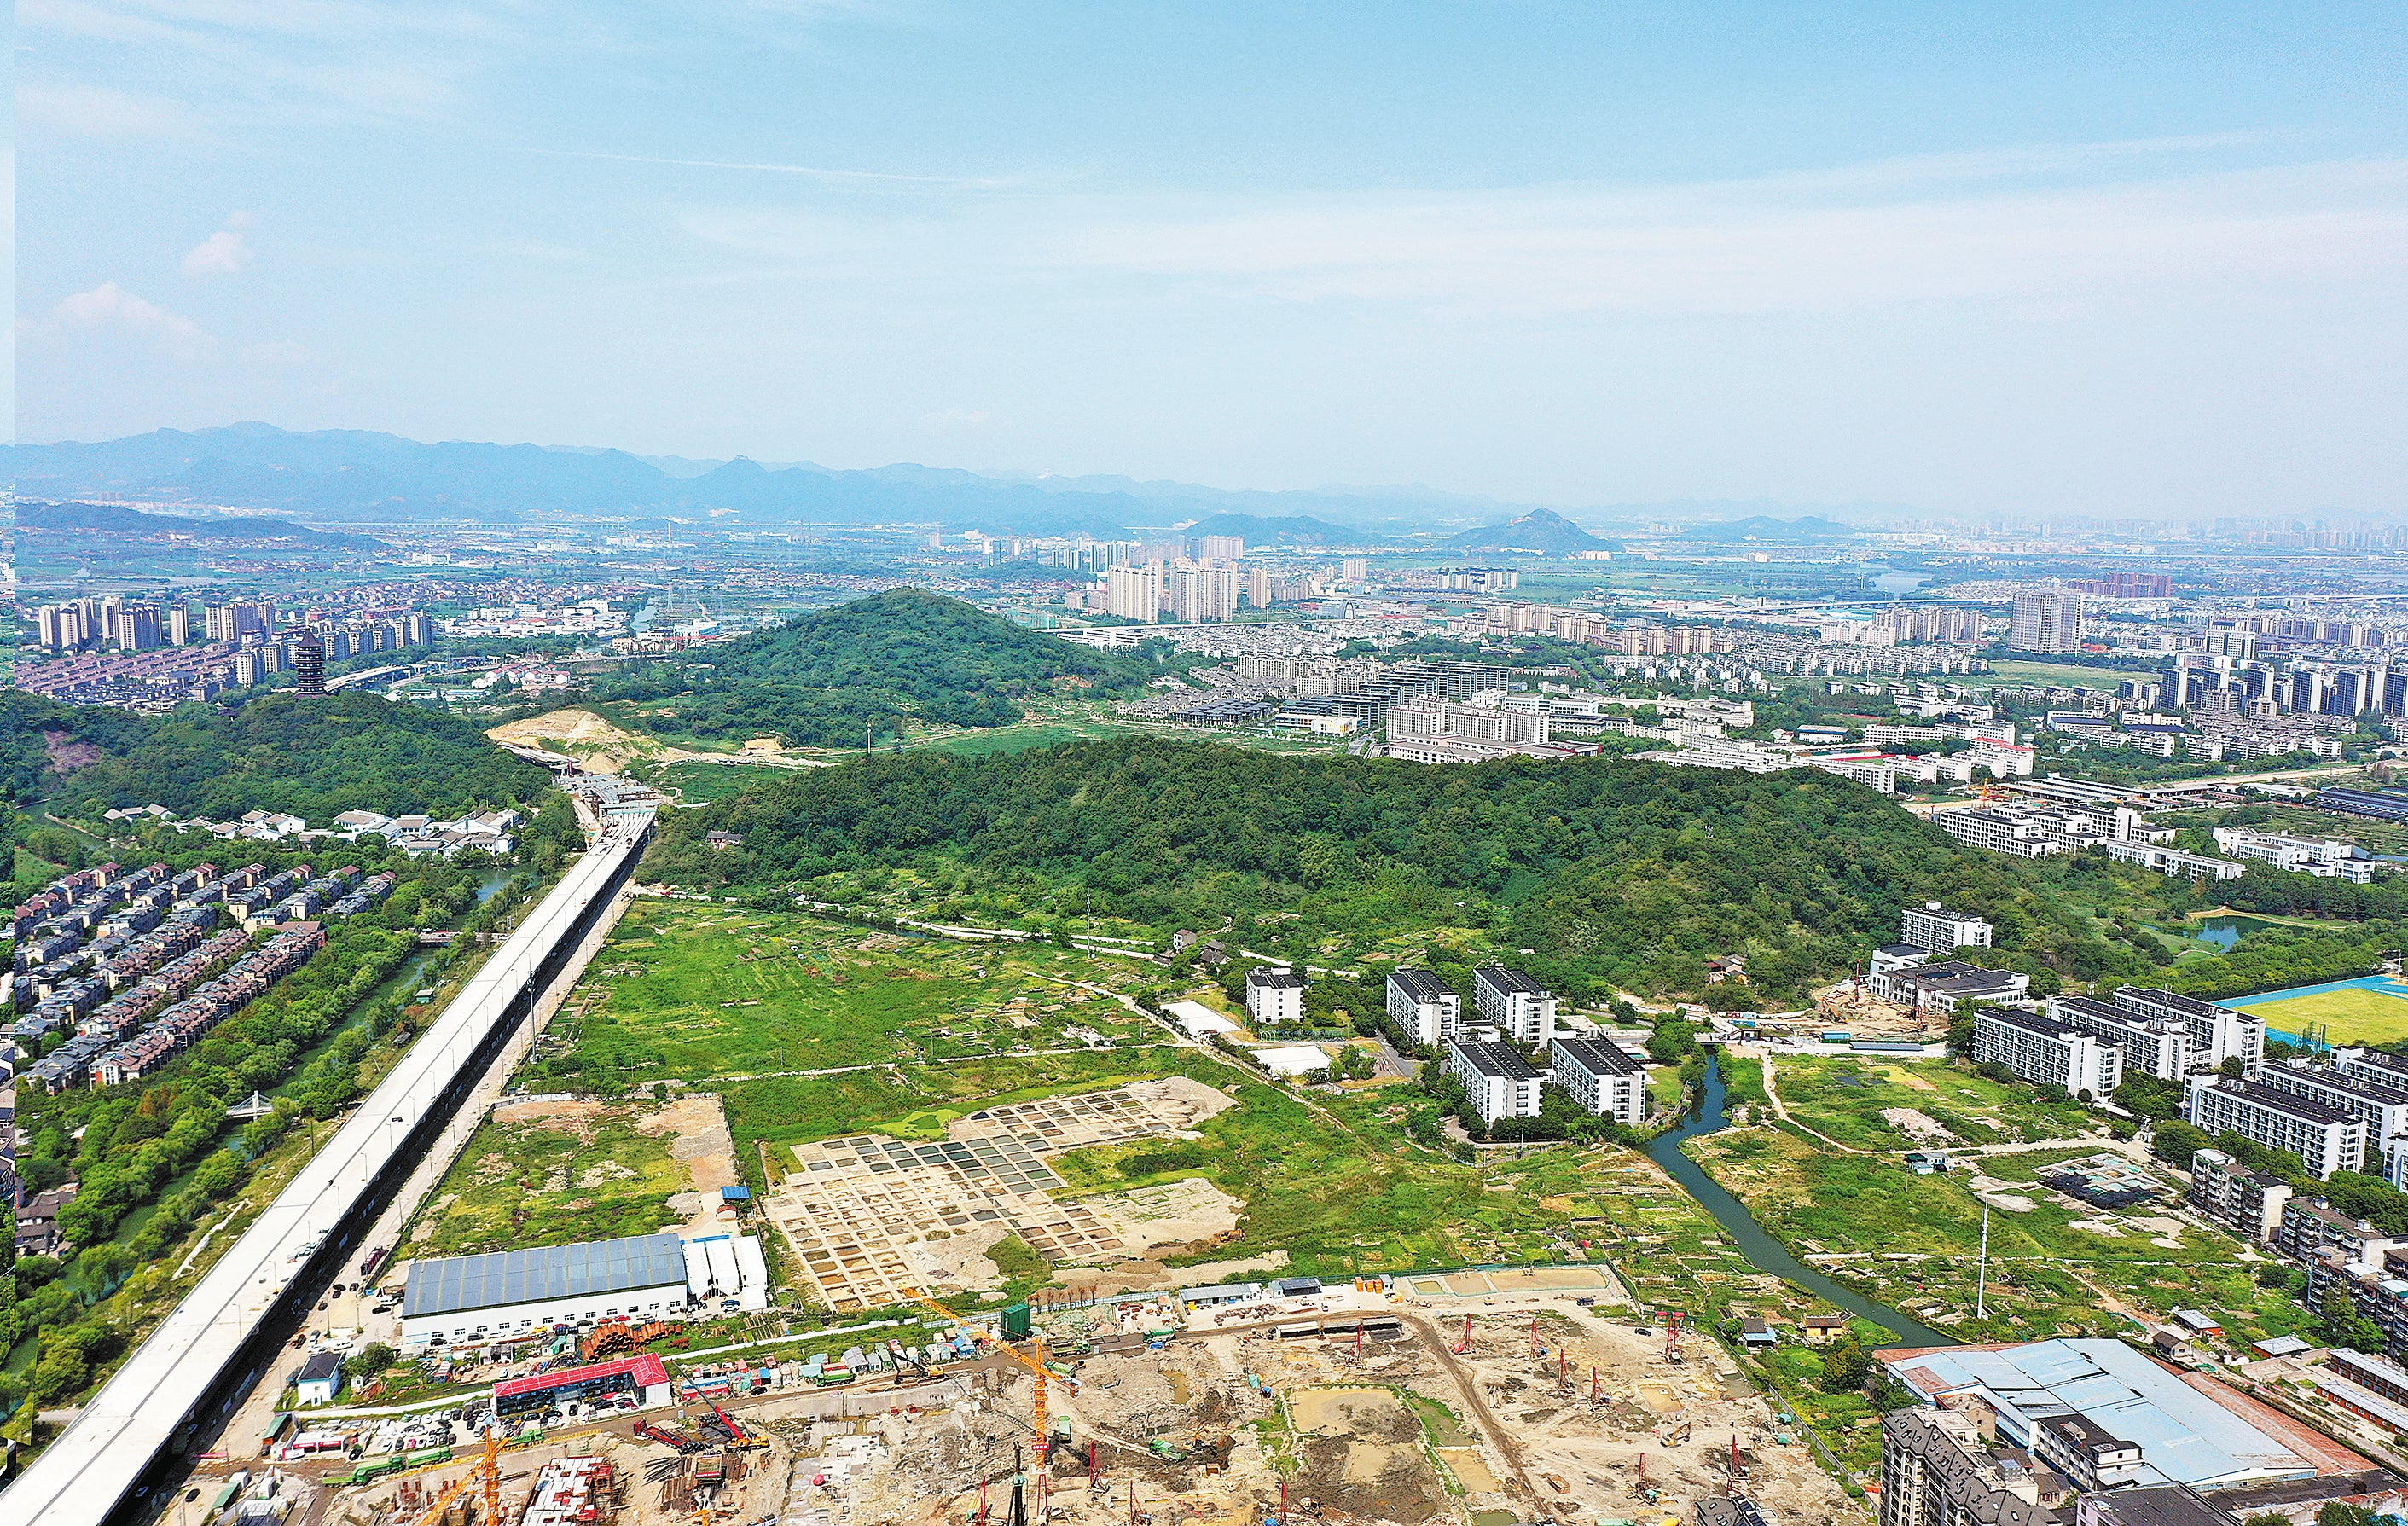 An aerial view of the Nanshan relic site and its surrounding environment in Yuecheng district, Shaoxing, Zhejiang province